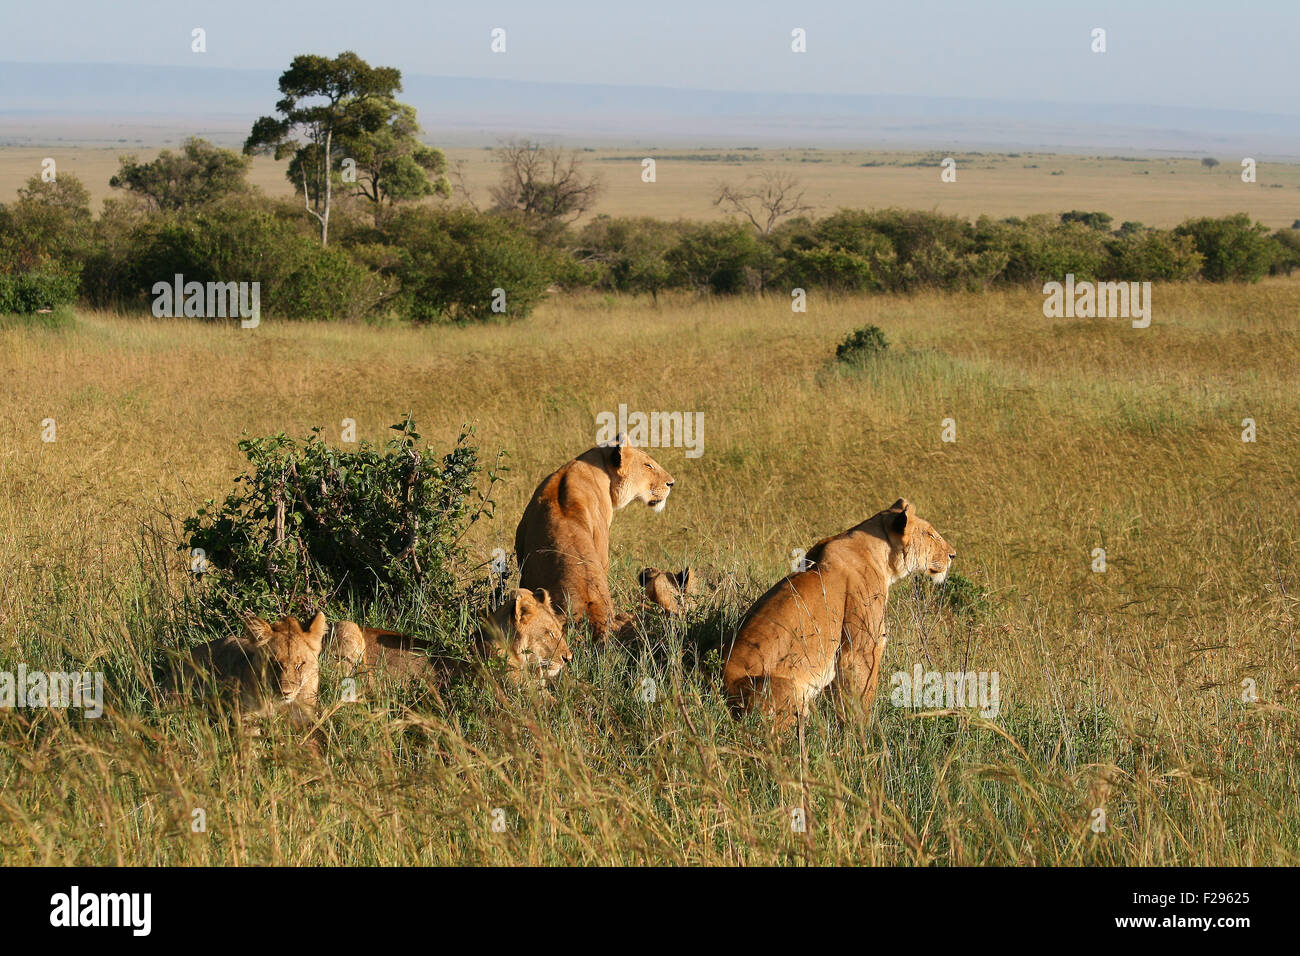 A group of wild lions in the savanna, Kenya Stock Photo